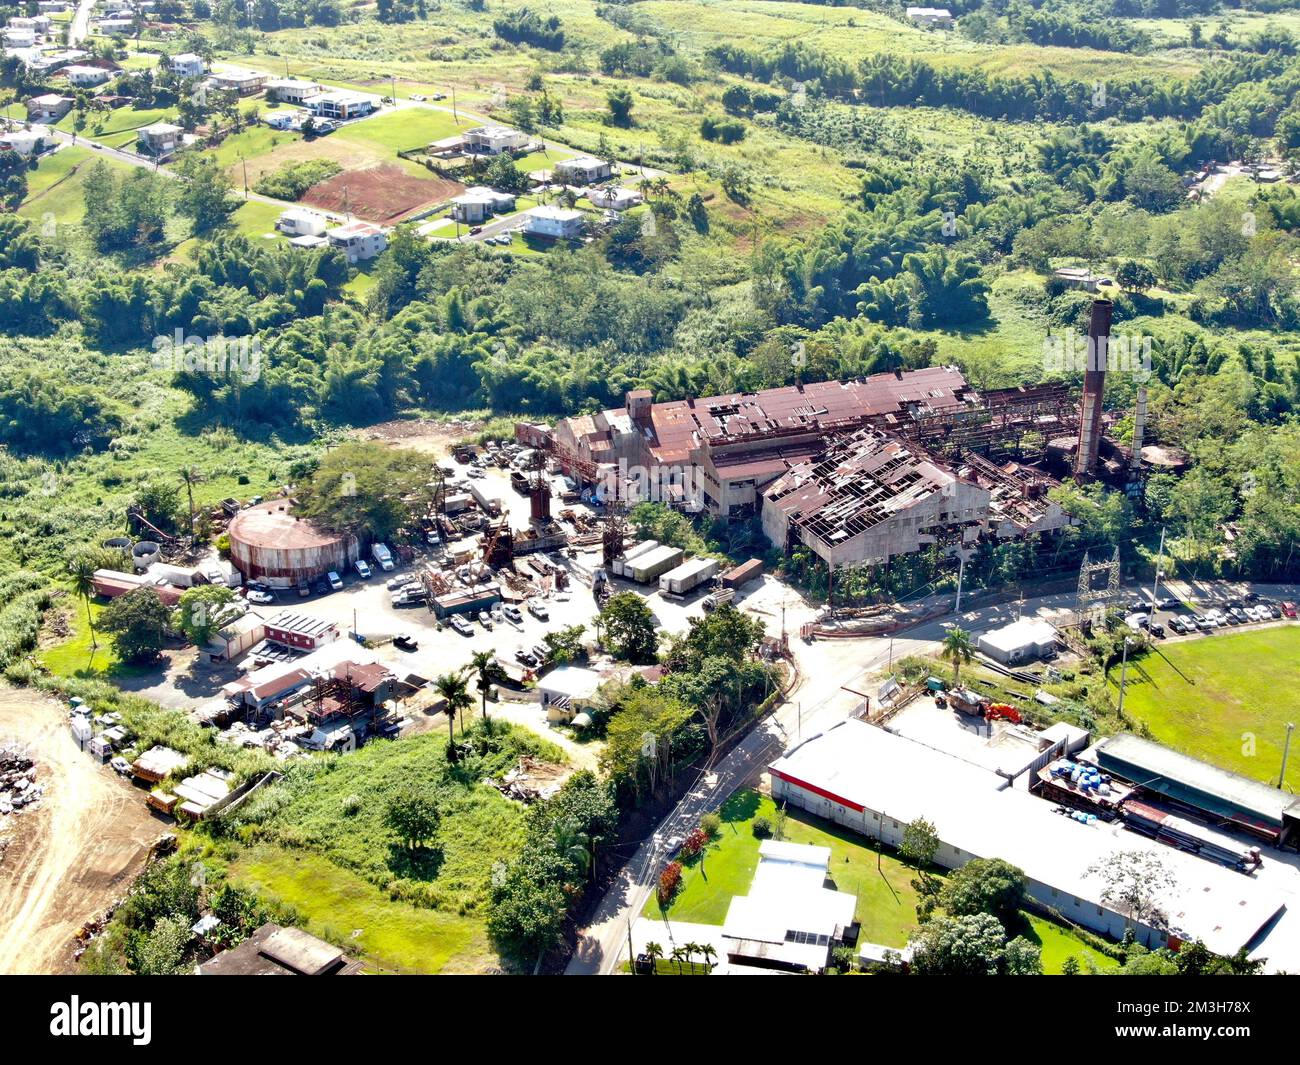 A drone view of Verkhozim and its ruined factory in Penza, Russia Stock Photo